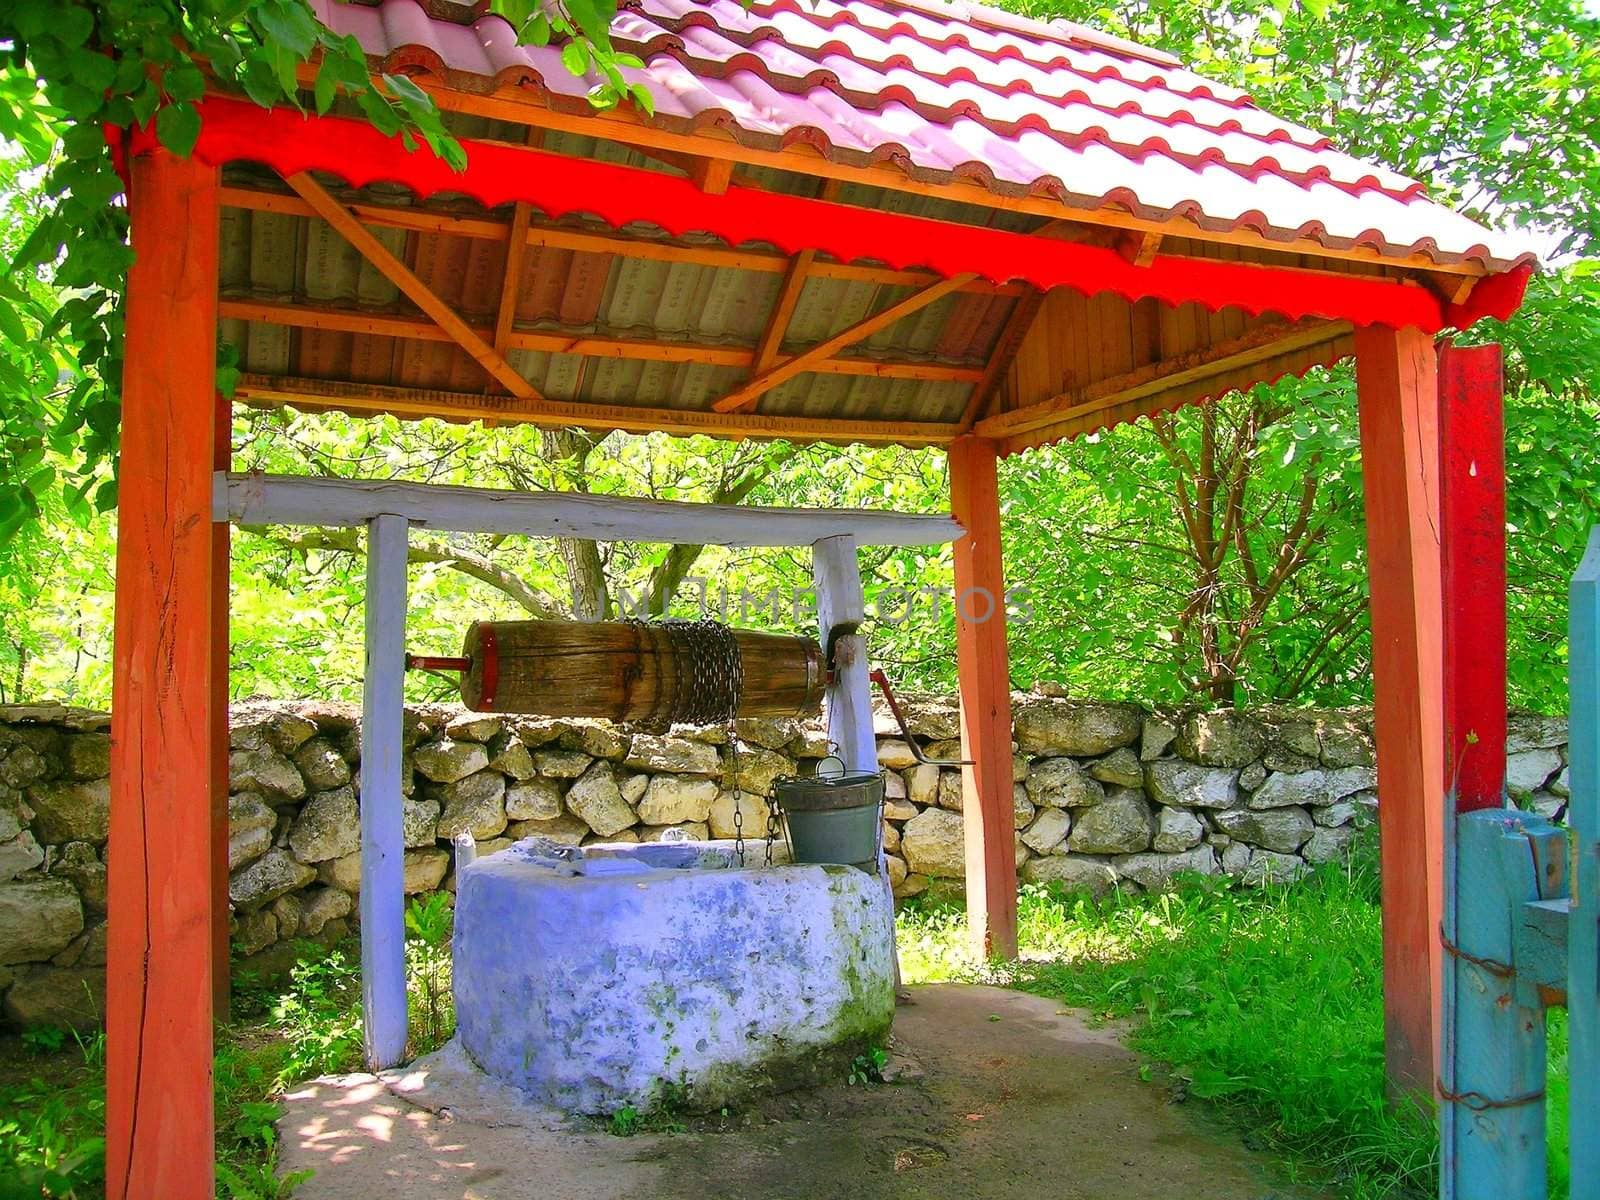 old, country well